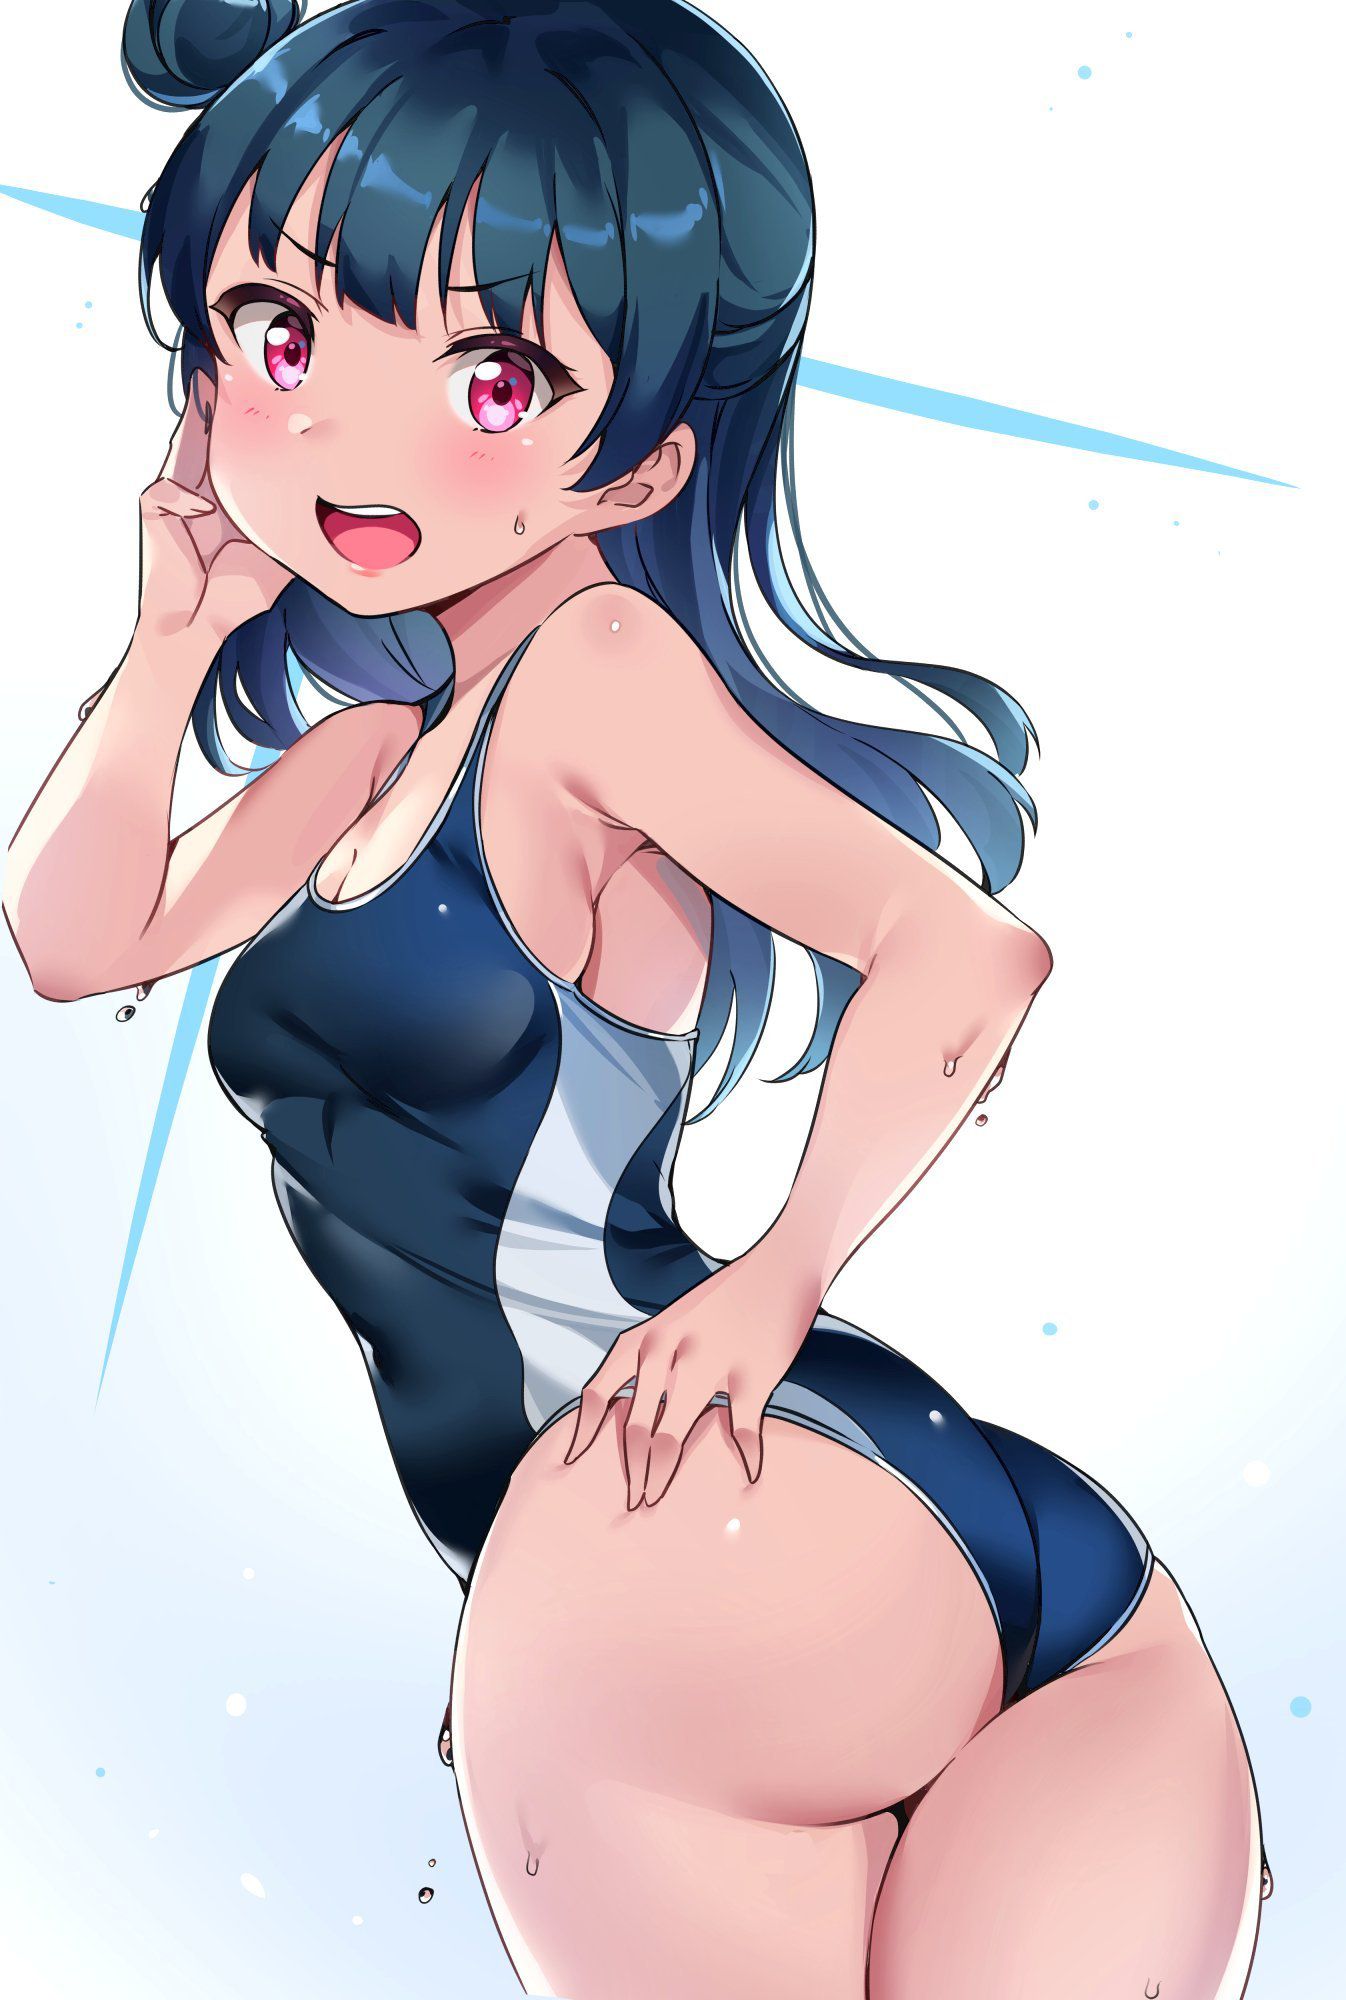 Isn't the new use of swimming swimsuits not underwater, but athletics? Two-dimensional erotic image of a sexy girl in a swimsuit that makes you think 3